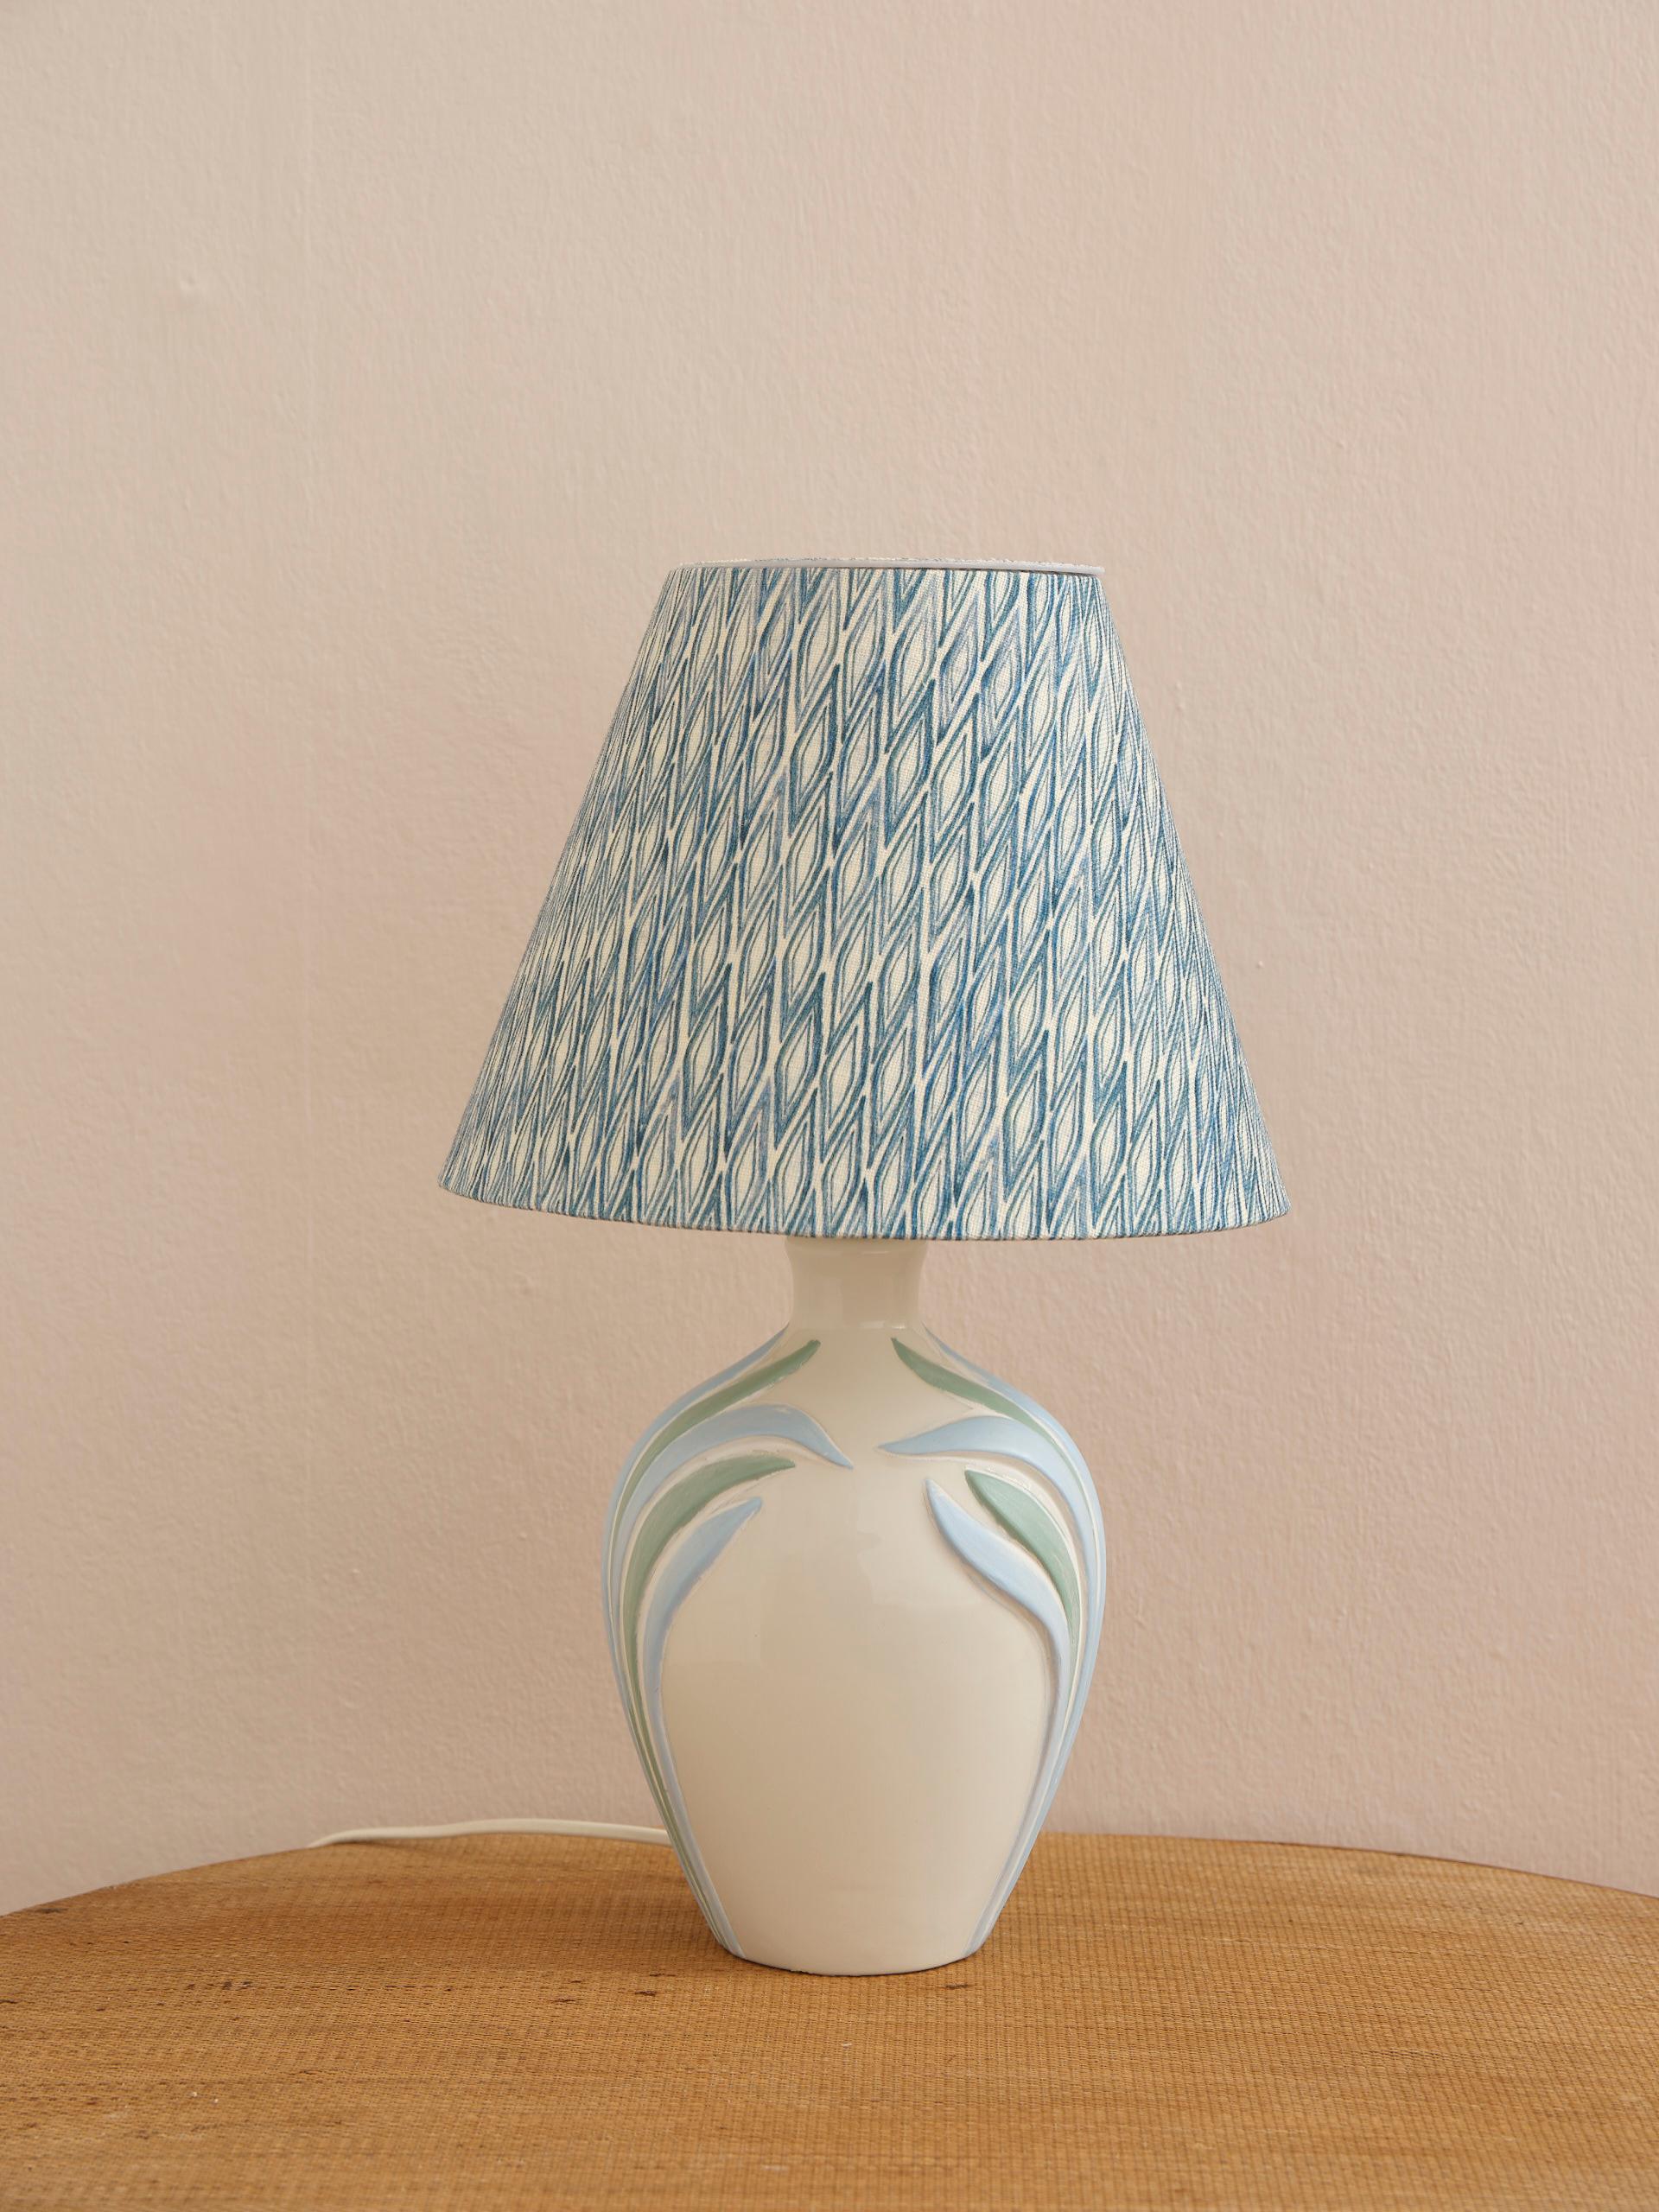 This gorgeous Italian table lamp in matte porcelain is decorated with pastel blue and green porcelain leaves making it a both typical 1980s and timeless luminous piece. Here mounted with a handmade lamp shade by Danish fashion brand I Blame Lulu